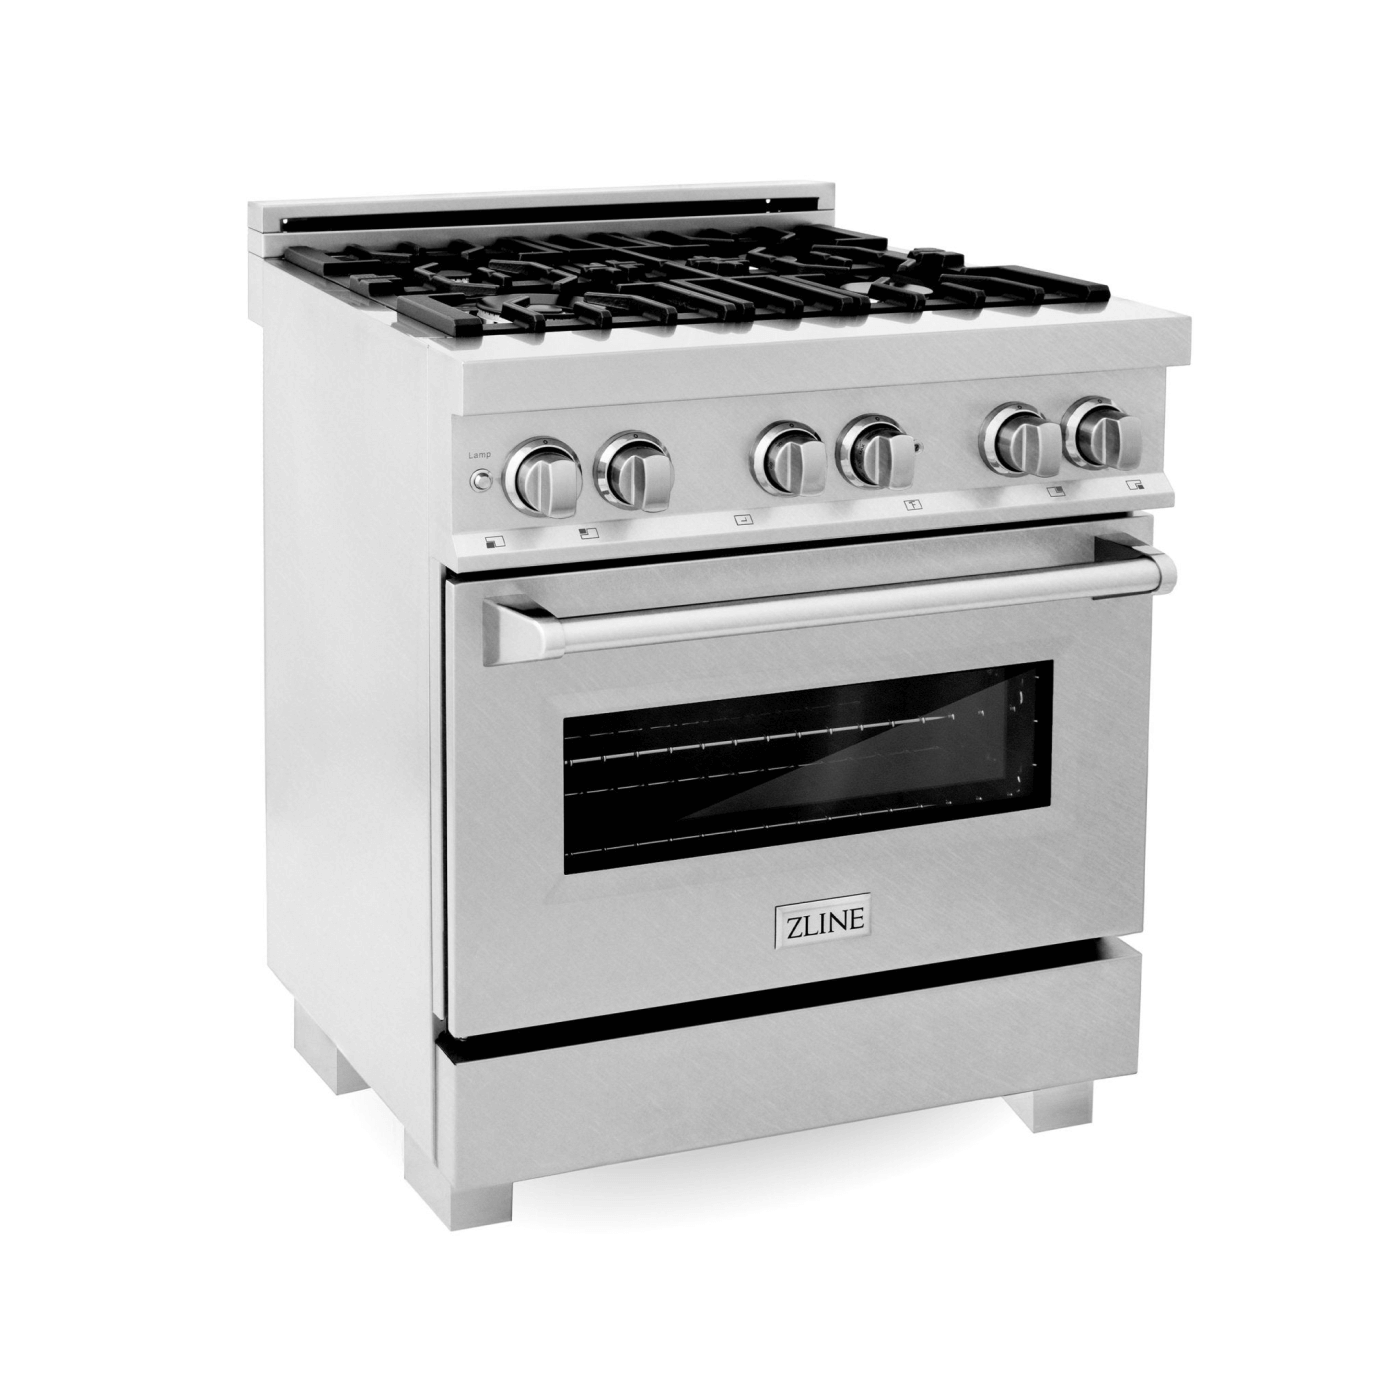 ZLINE 30 in. 4.0 cu. ft. Dual Fuel Range with Gas Stove and Electric Oven in All Fingerprint Resistant Stainless Steel (RAS-SN-30) - white background